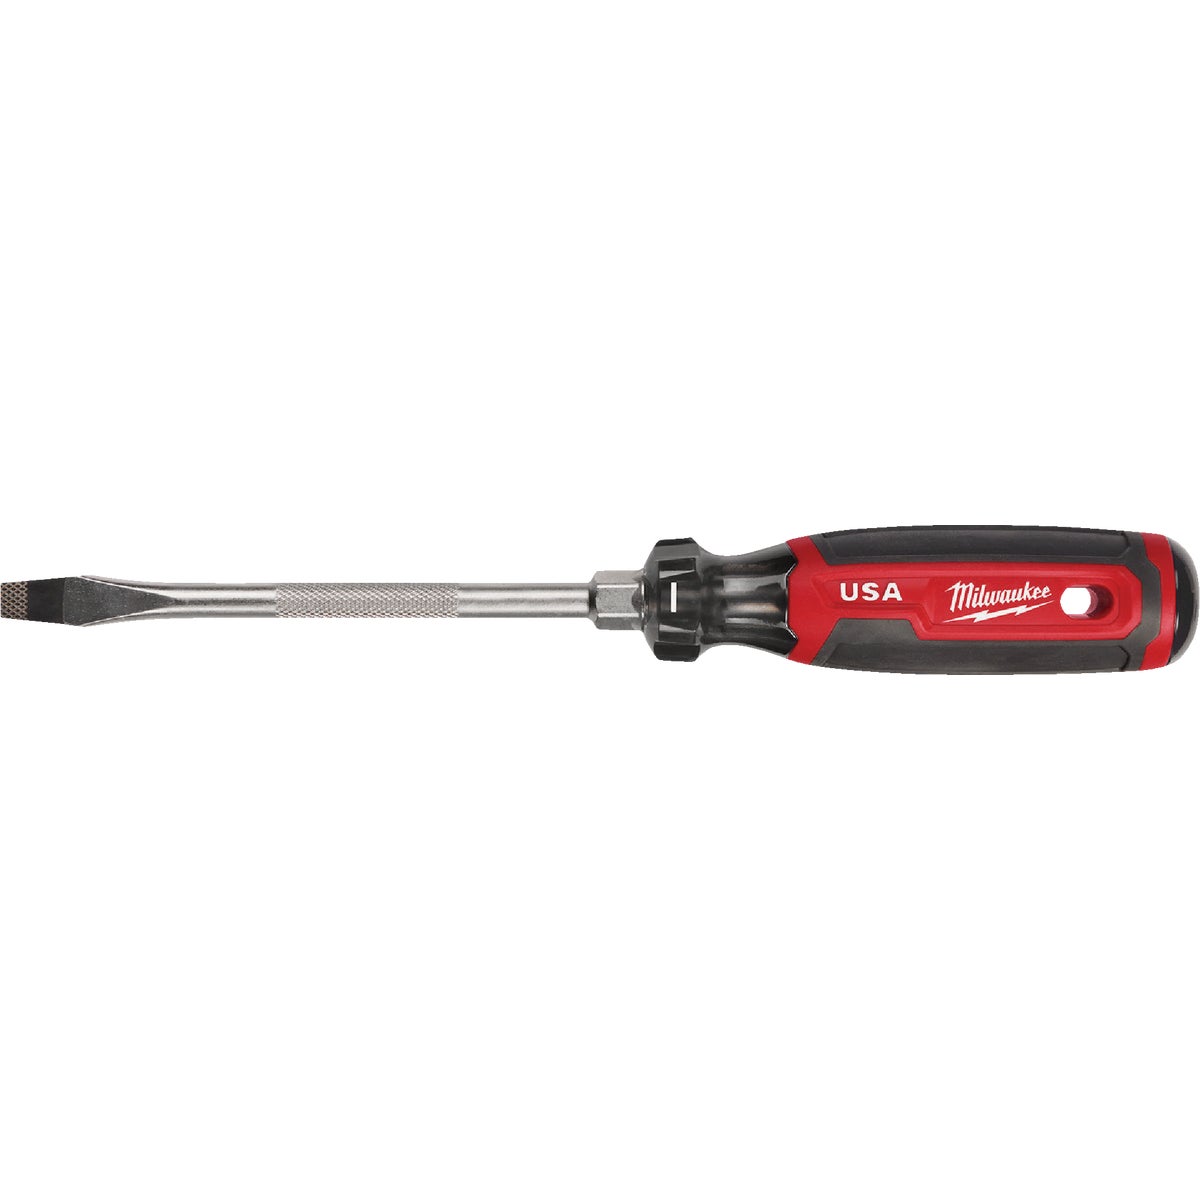 Milwaukee 5/16 In. x 6 In. Cushion Grip Slotted Screwdriver (USA)